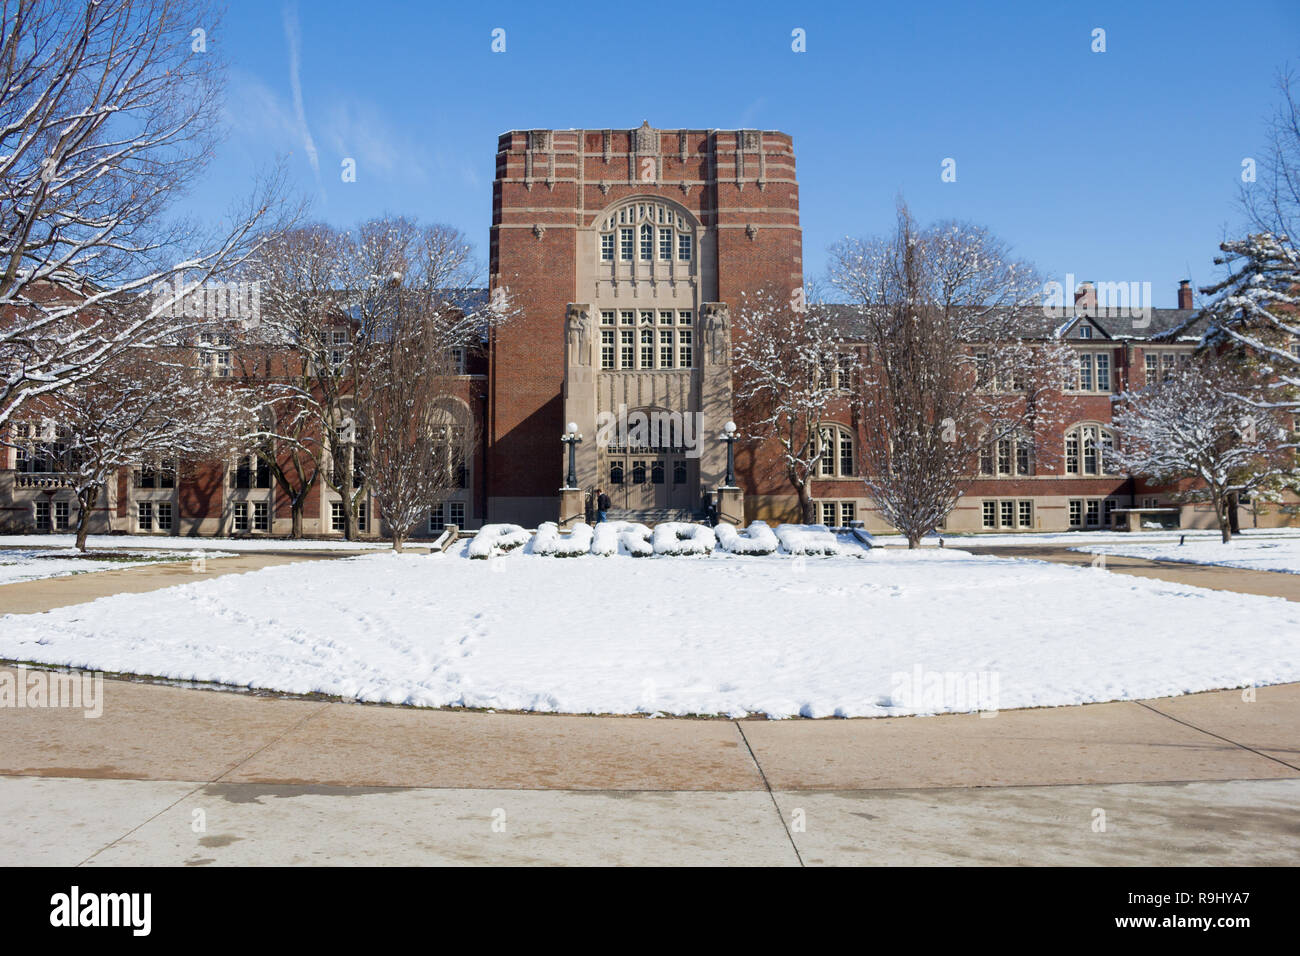 Purdue Memorial Union with snow, Purdue University, West Lafayette, Indiana, United States Stock Photo